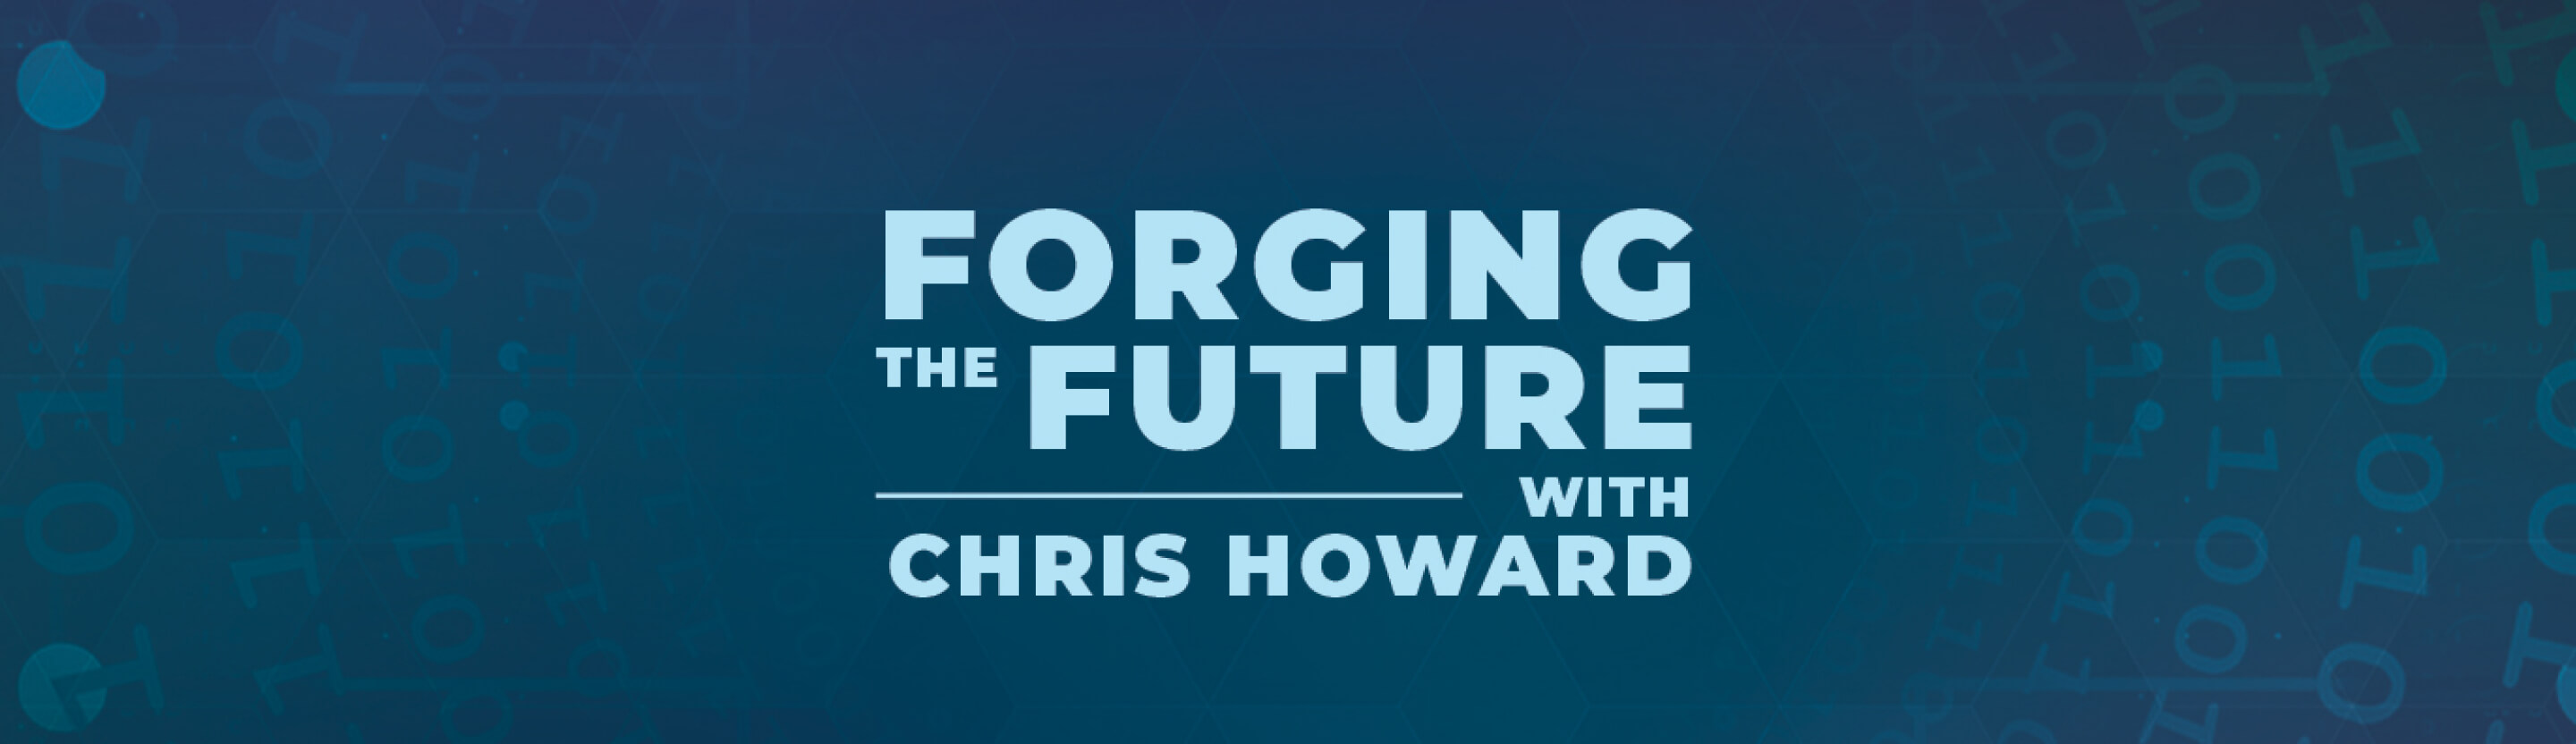 Forging the Future with Chris Howard | Podcast